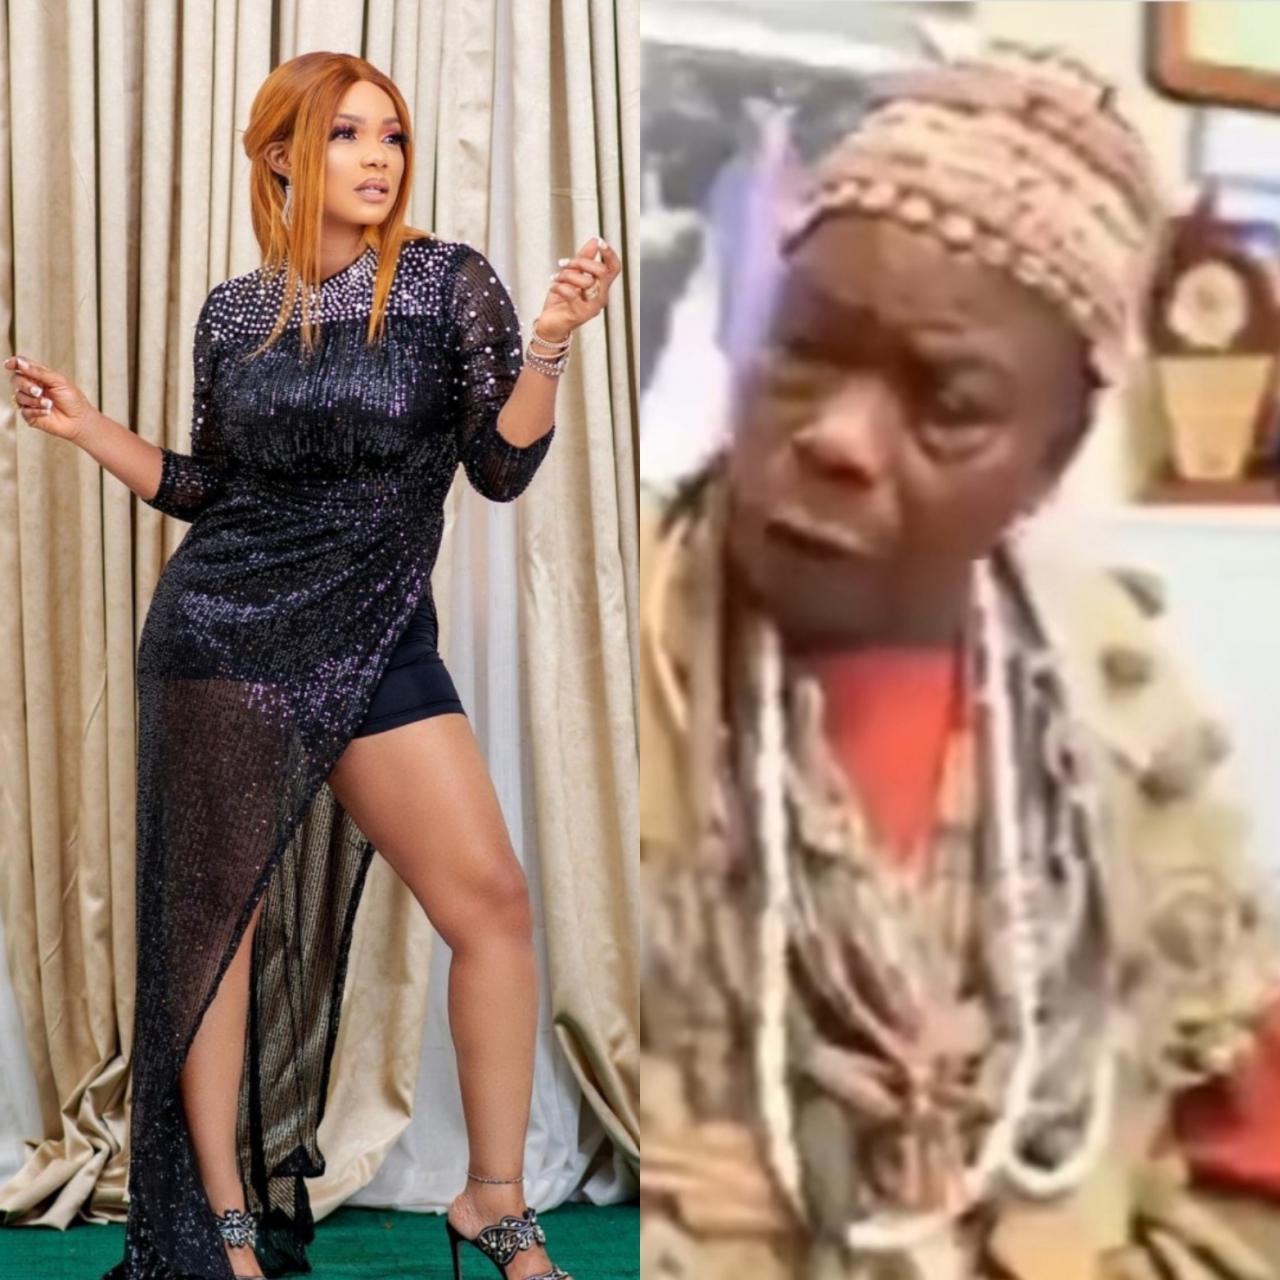 Iyabo Ojo speaks as elderly man grants interview calling her a prostitute and saying she will "suffer and die" for "tarnishing" Baba Ijesha